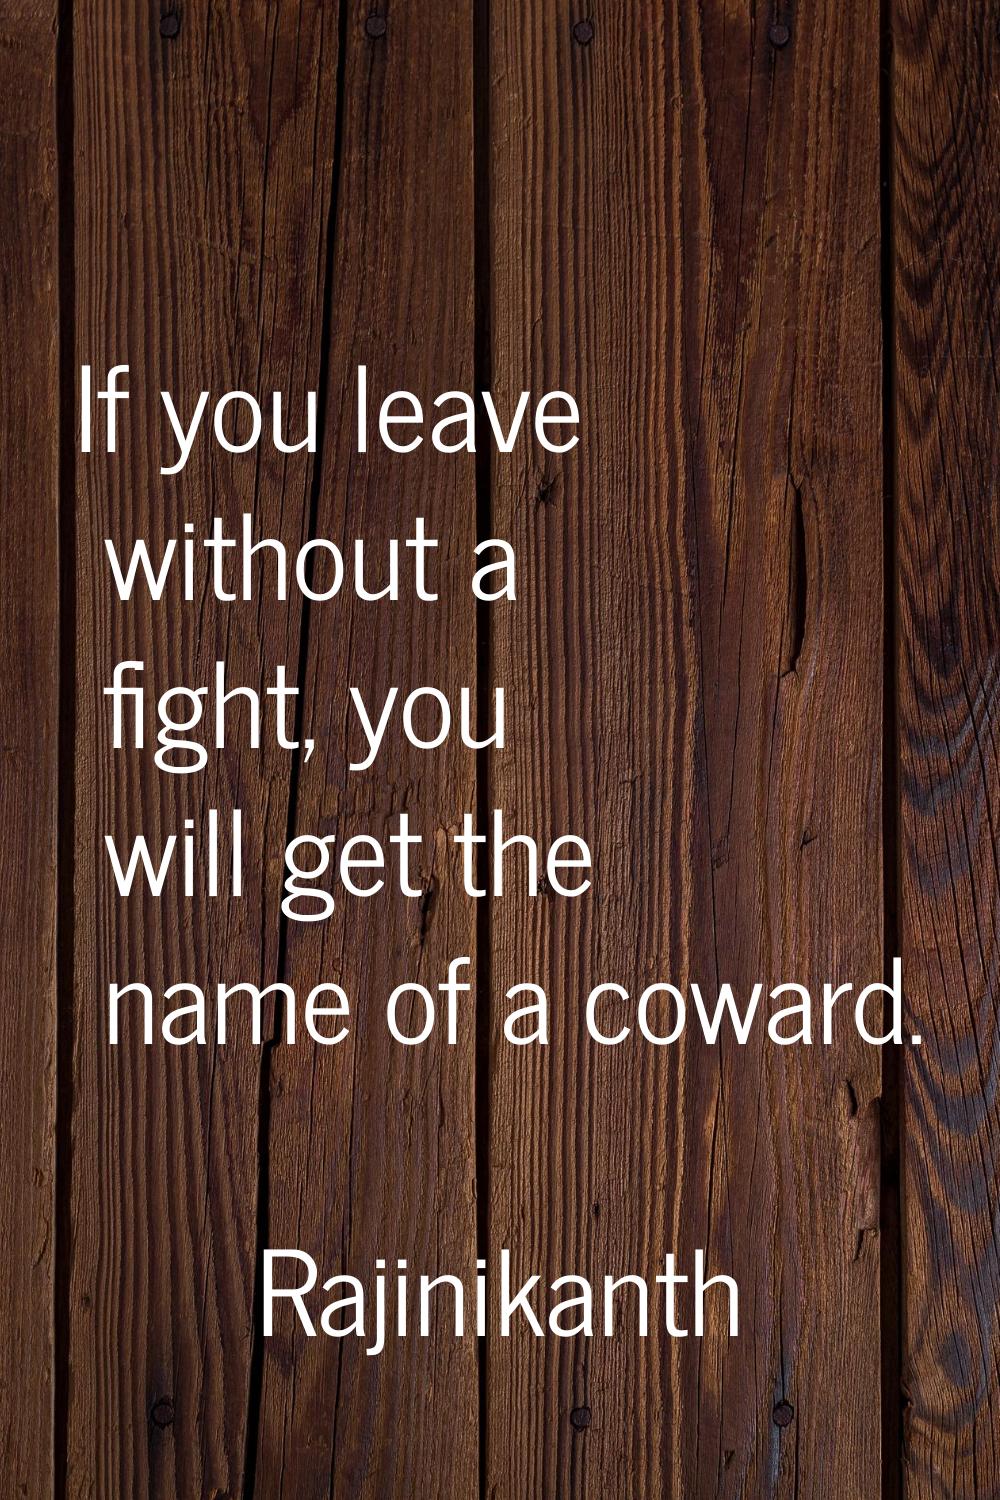 If you leave without a fight, you will get the name of a coward.